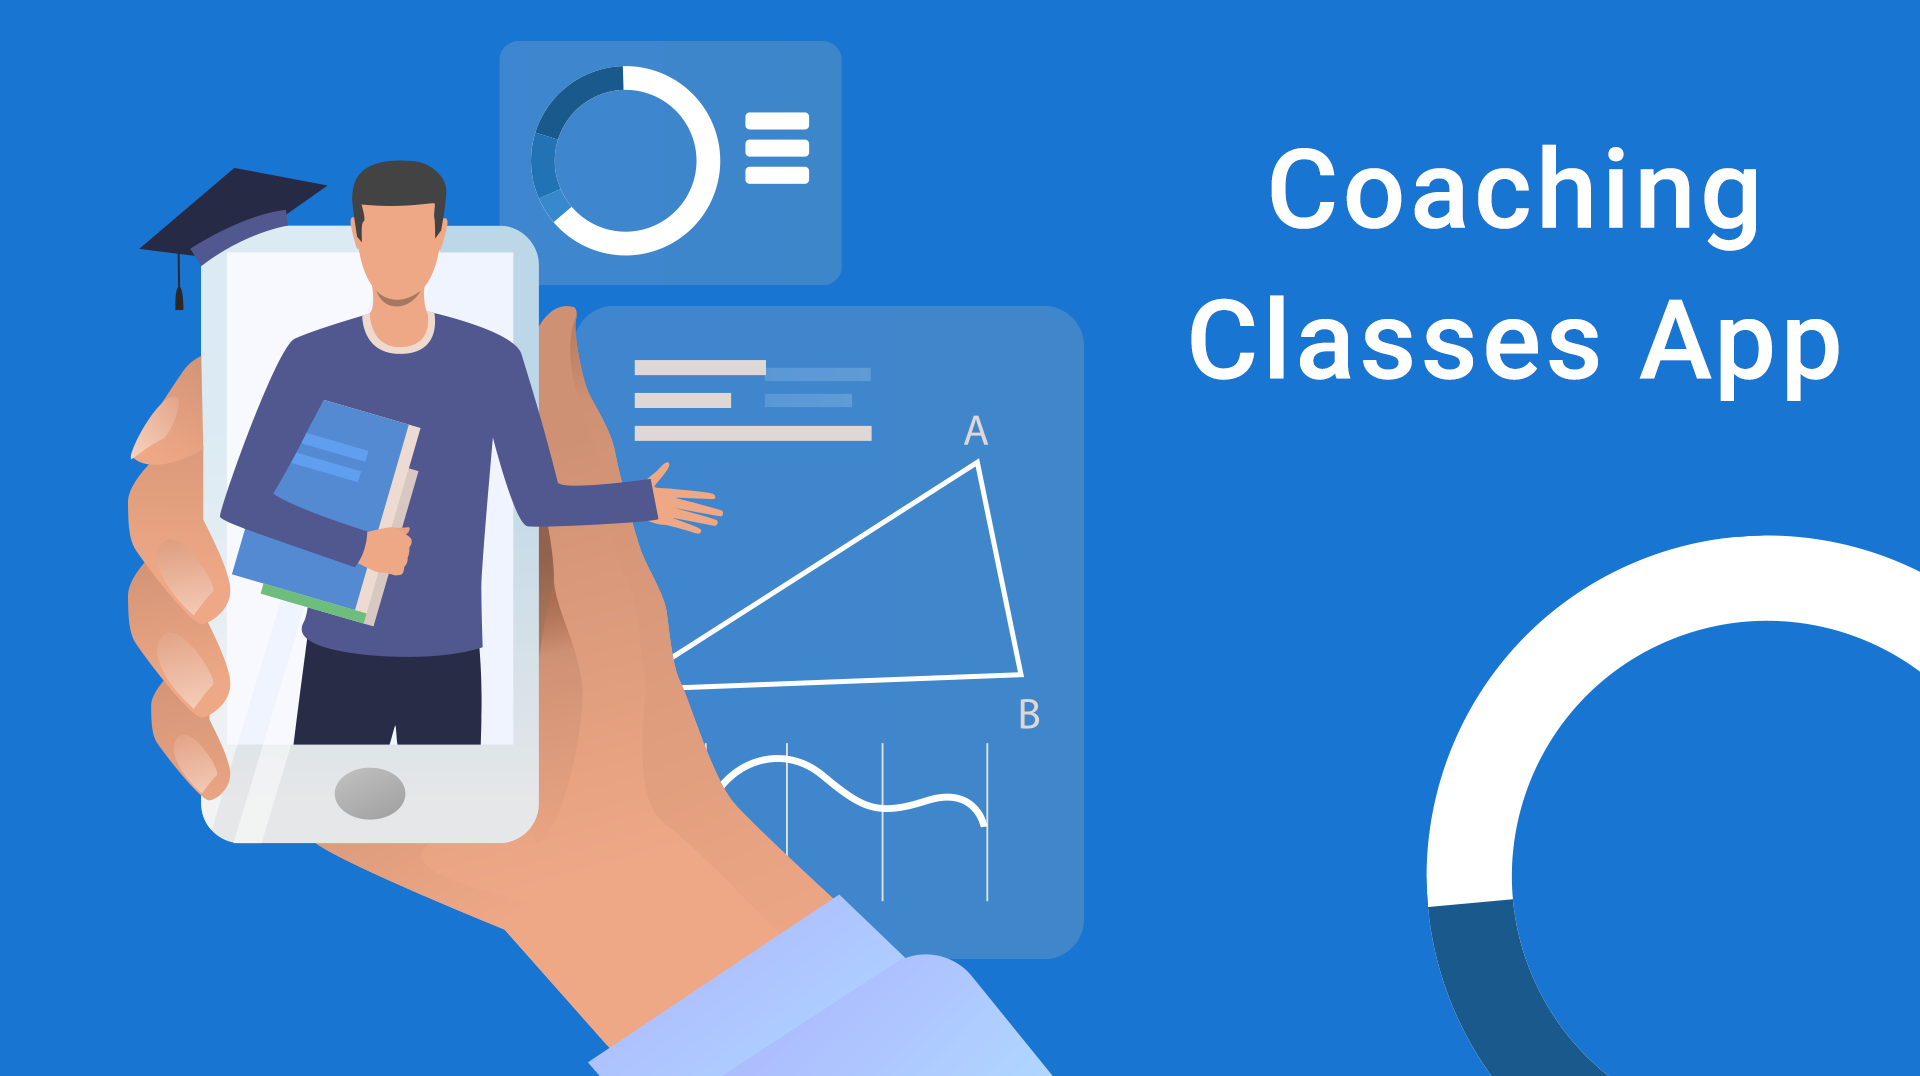 How much does it cost to develop a coaching classes App